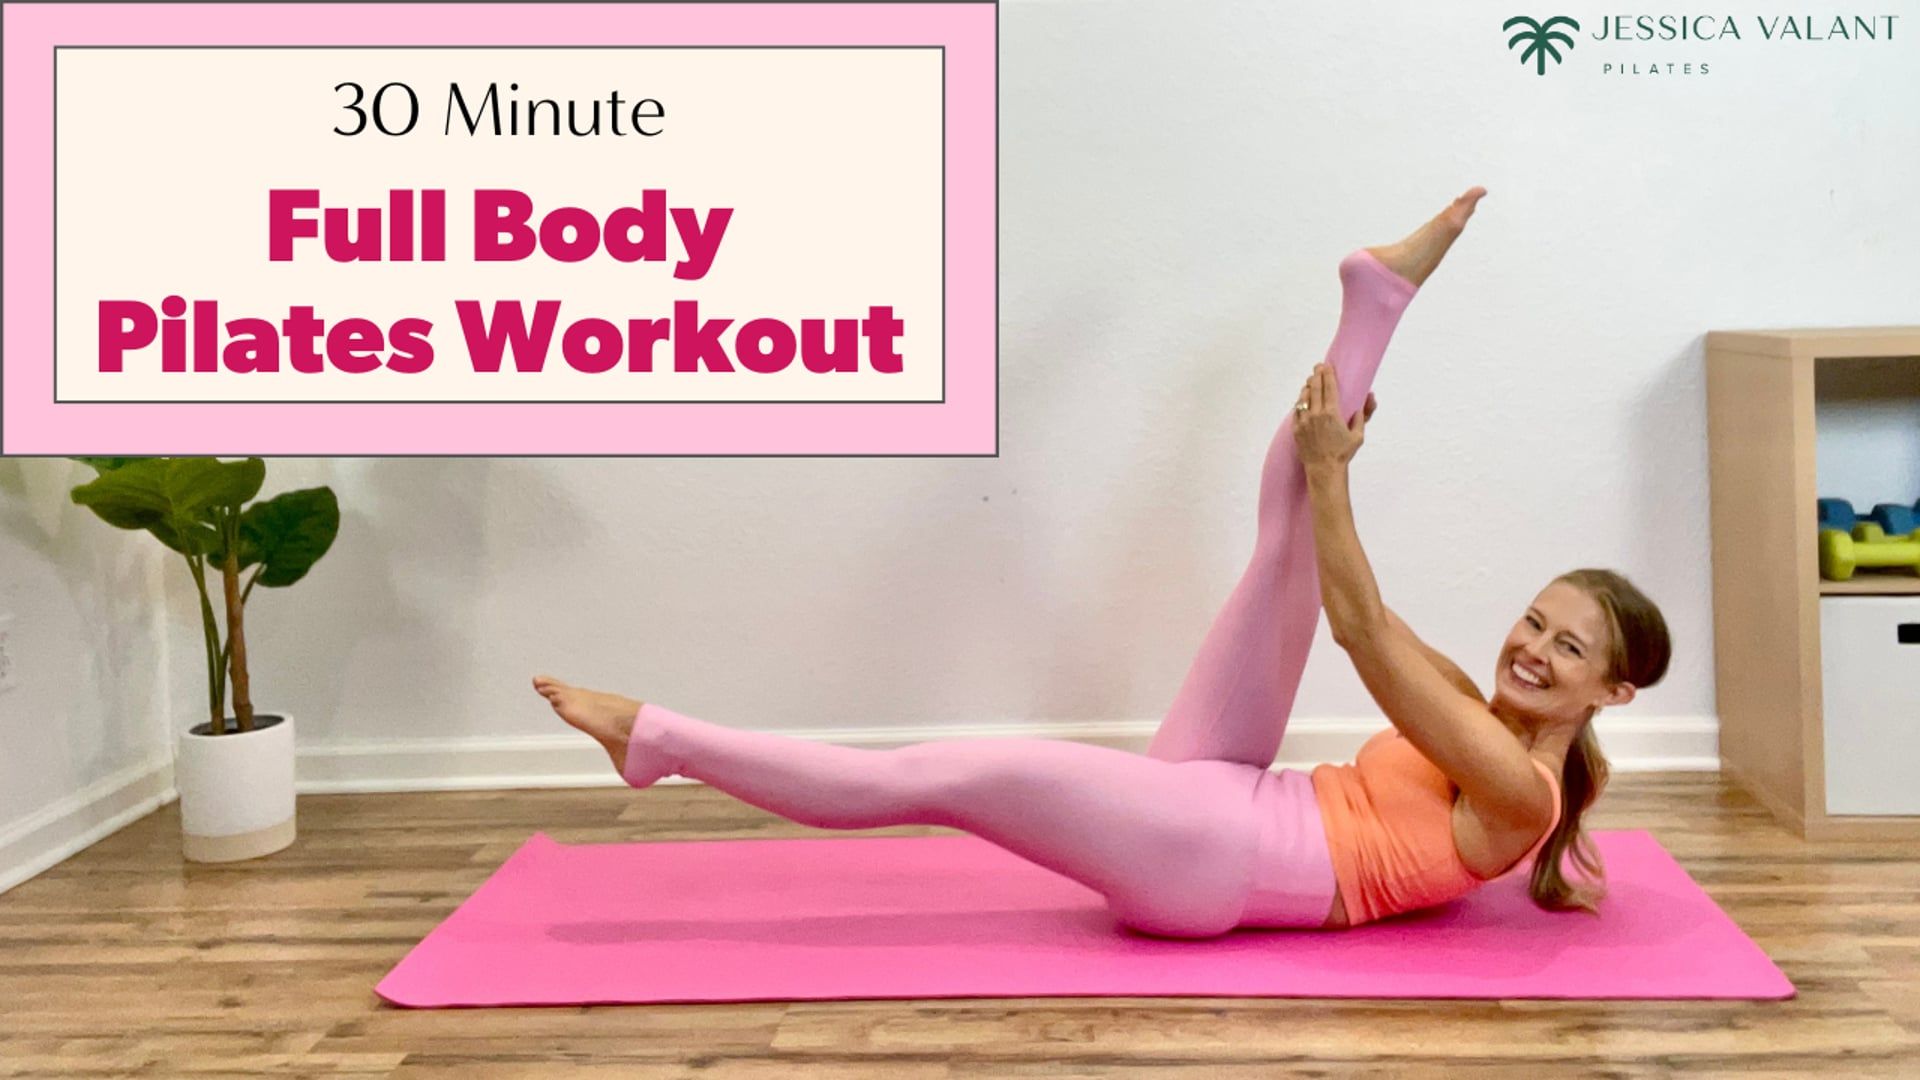 30 Minute Full Body Pilates Workout - Jessica's Personal Routine